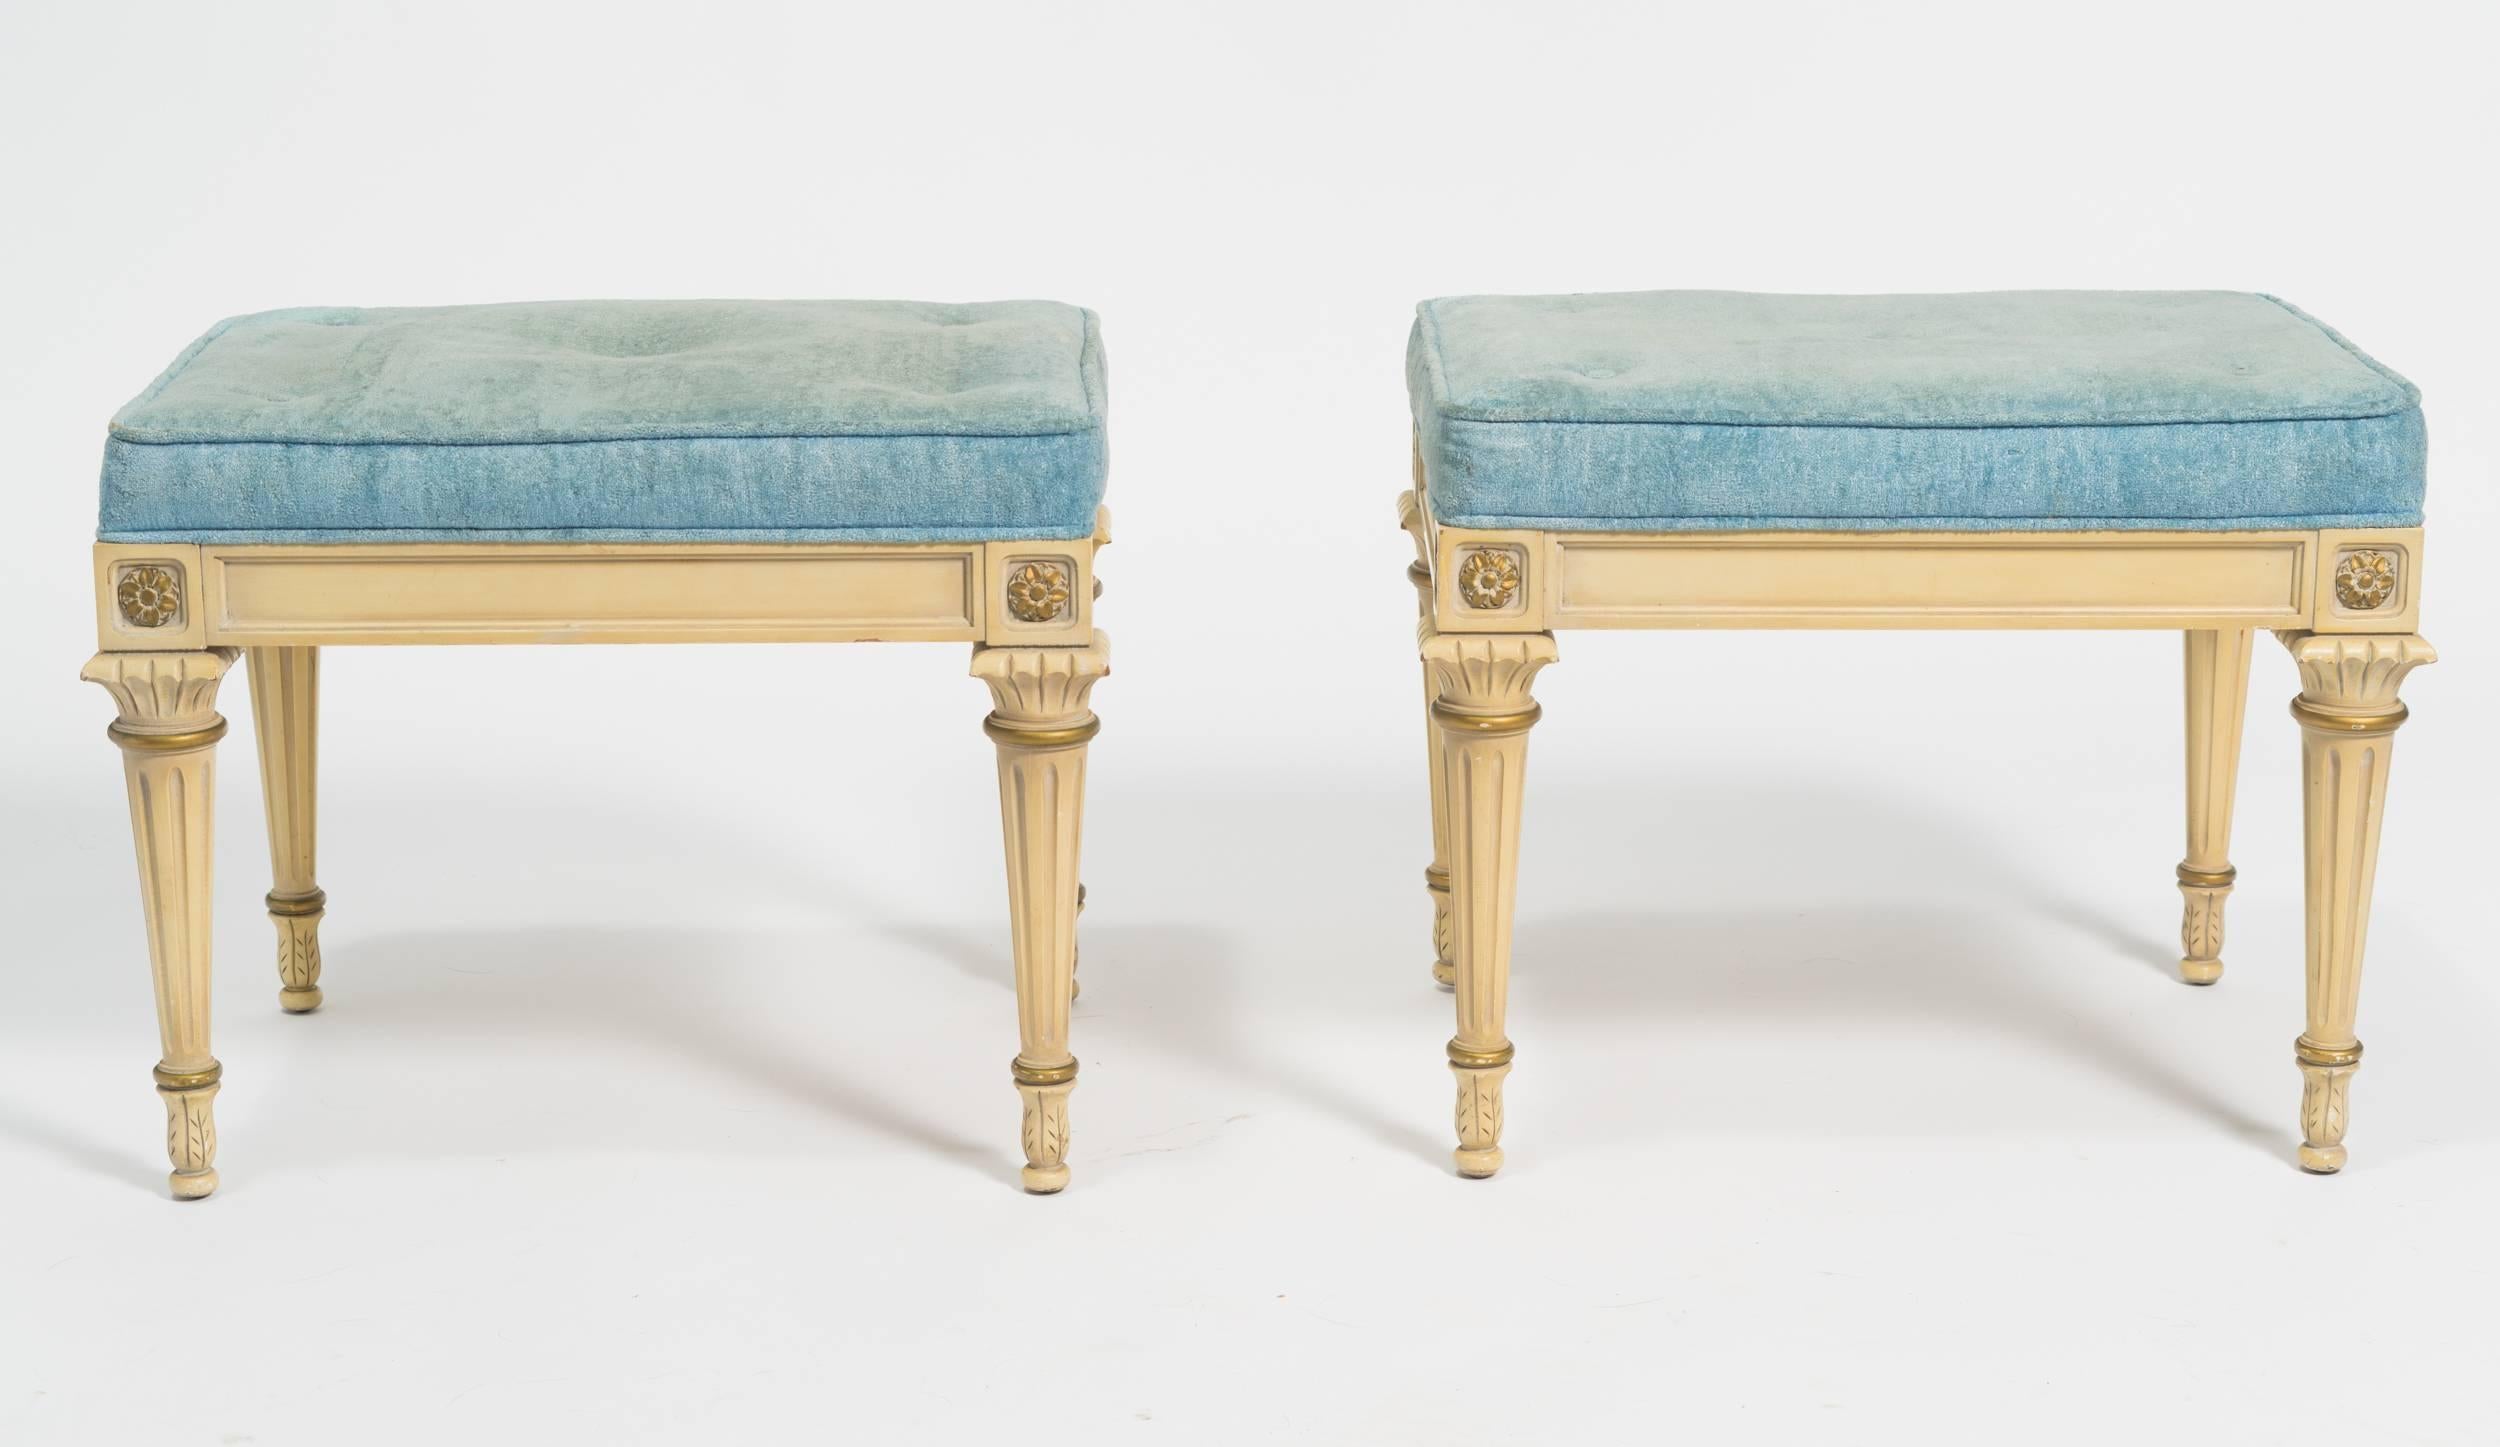 Pair of Regency style footstools. These benches need to be reupholstered. The fabric got damaged. They do not look like they do in the pictures.